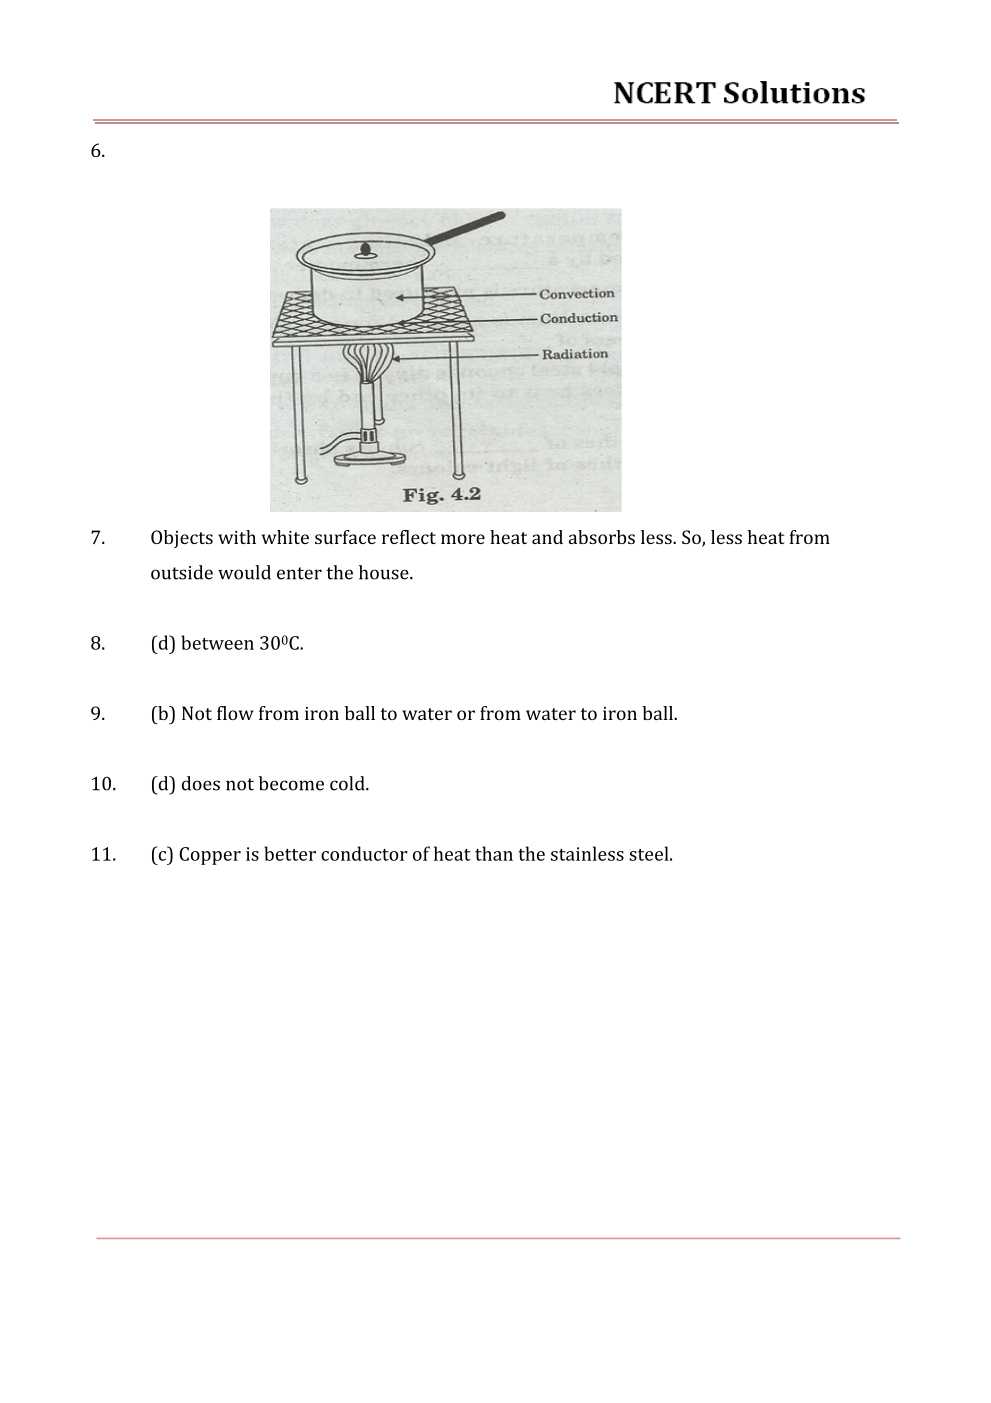 NCERT Solutions For Class 7 science Chapter 4 Heat